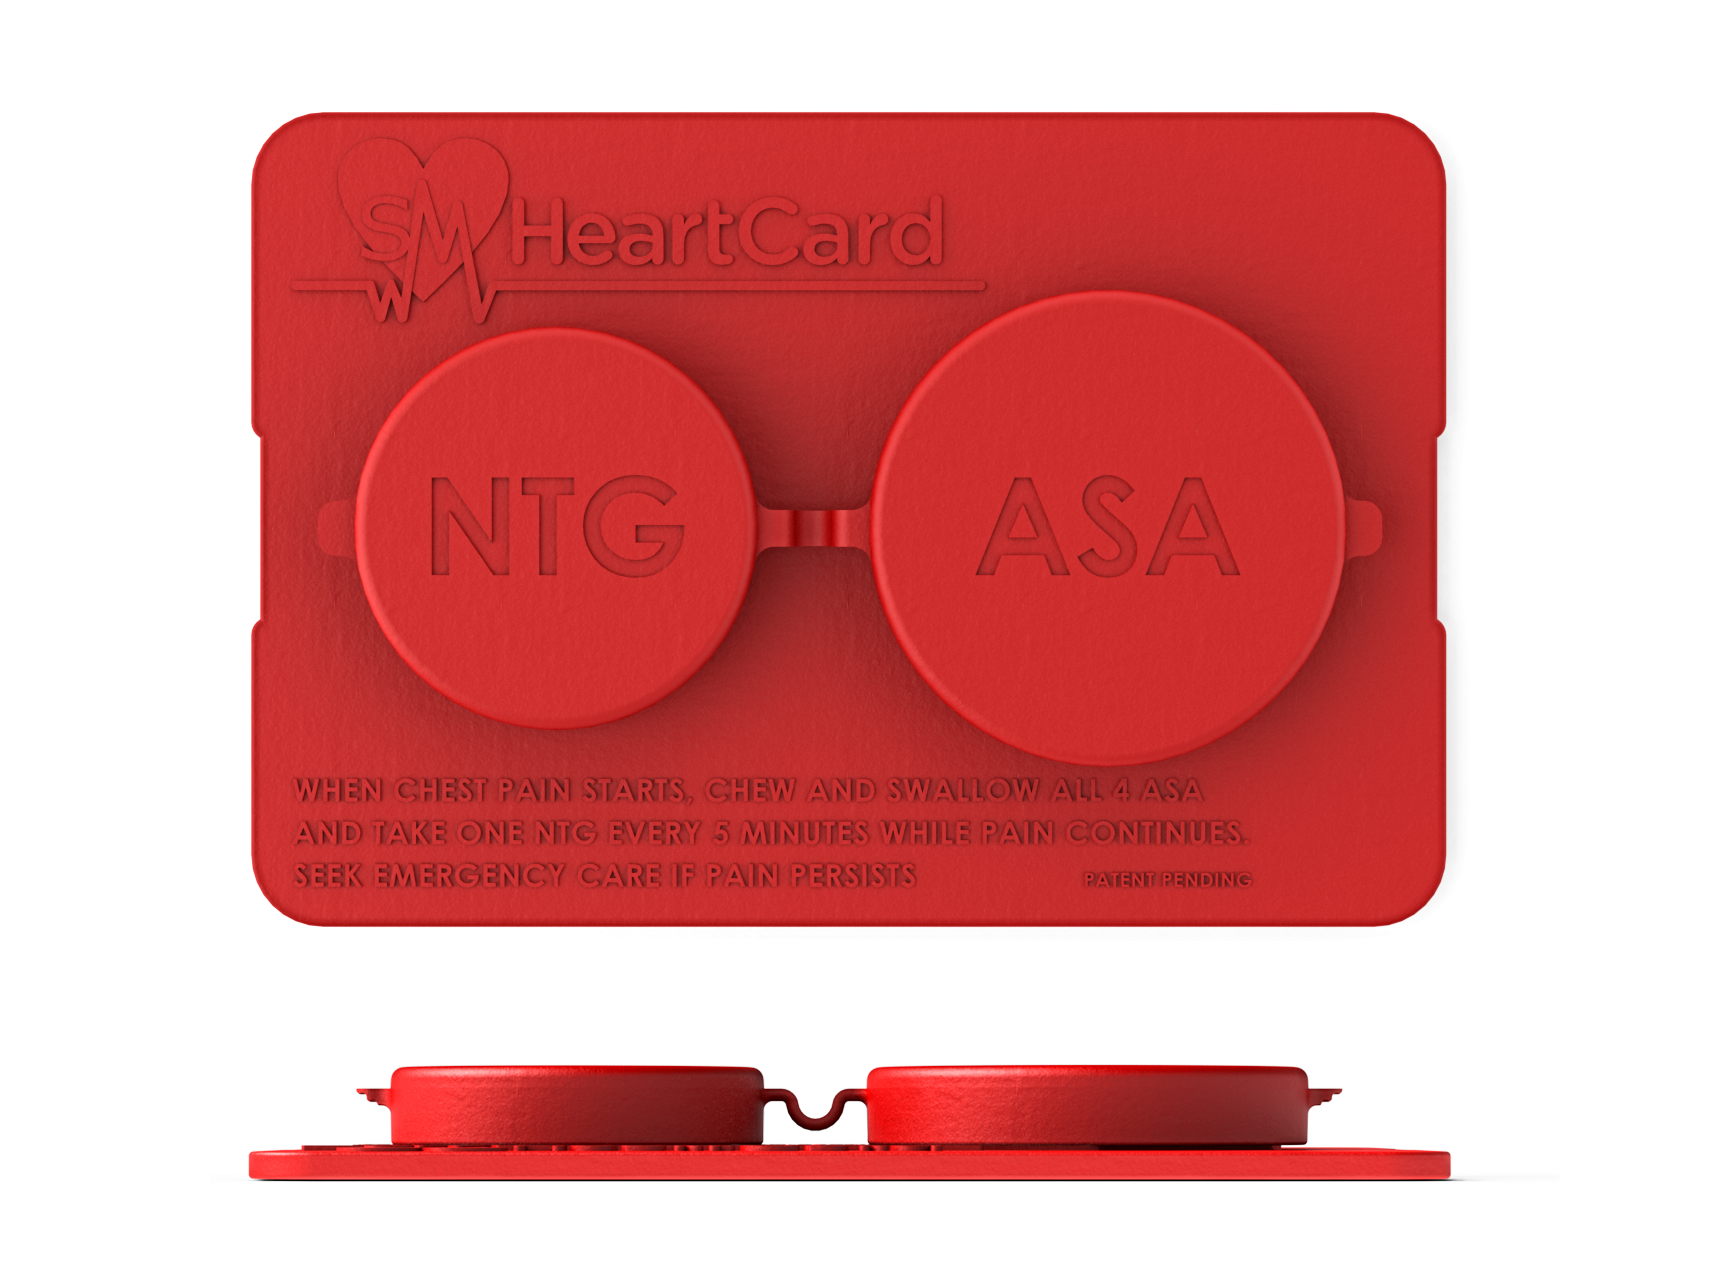 SMHeartCard Loaded - ships to you with Nitroglycerin and ASA pills inside